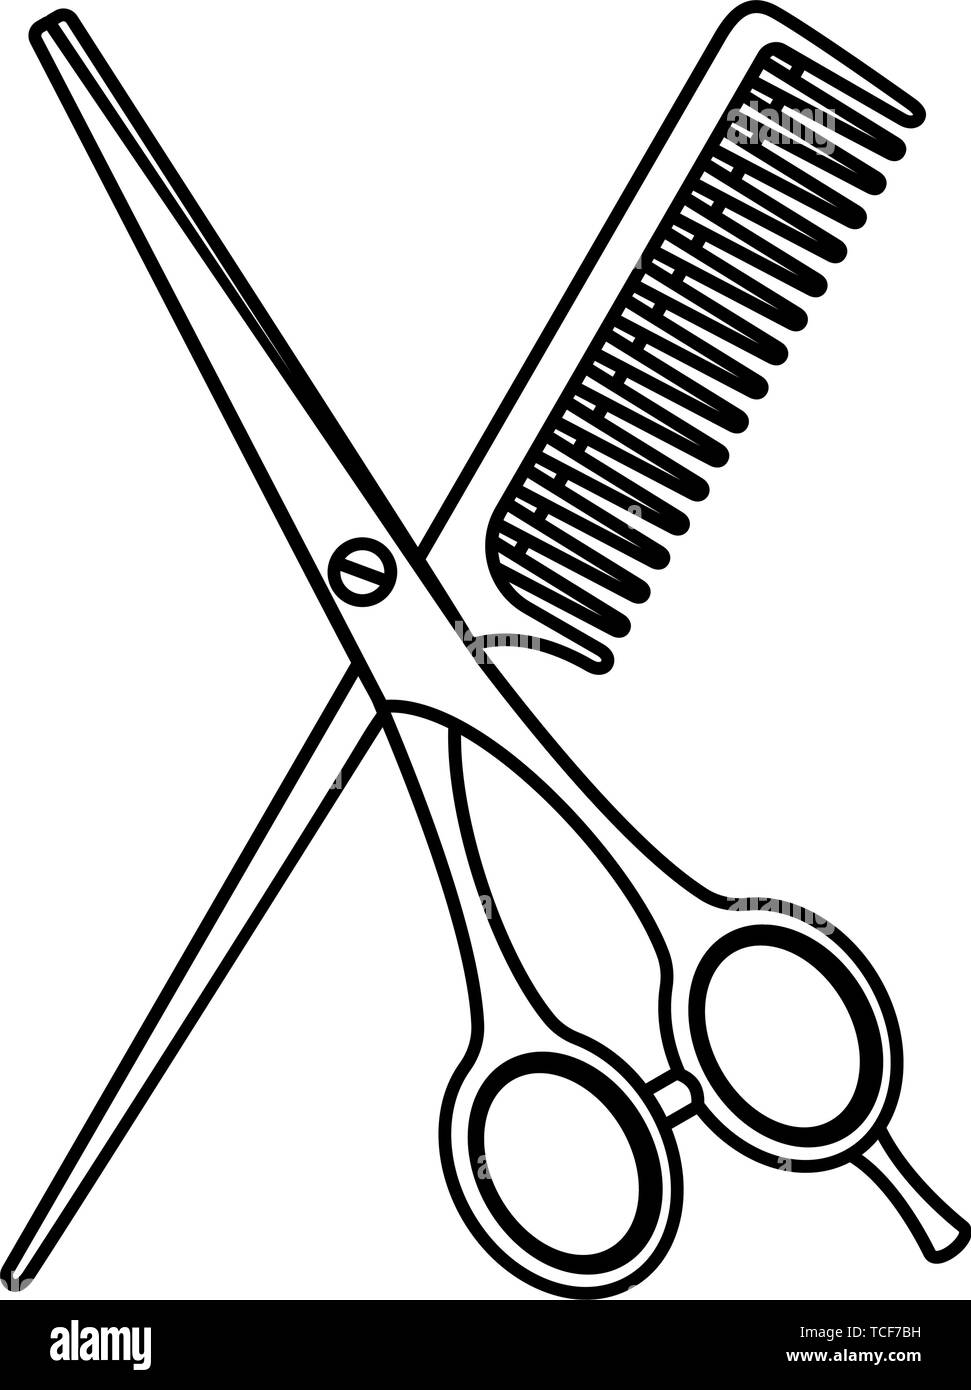 Line art black and white scissors and comb Stock Vector